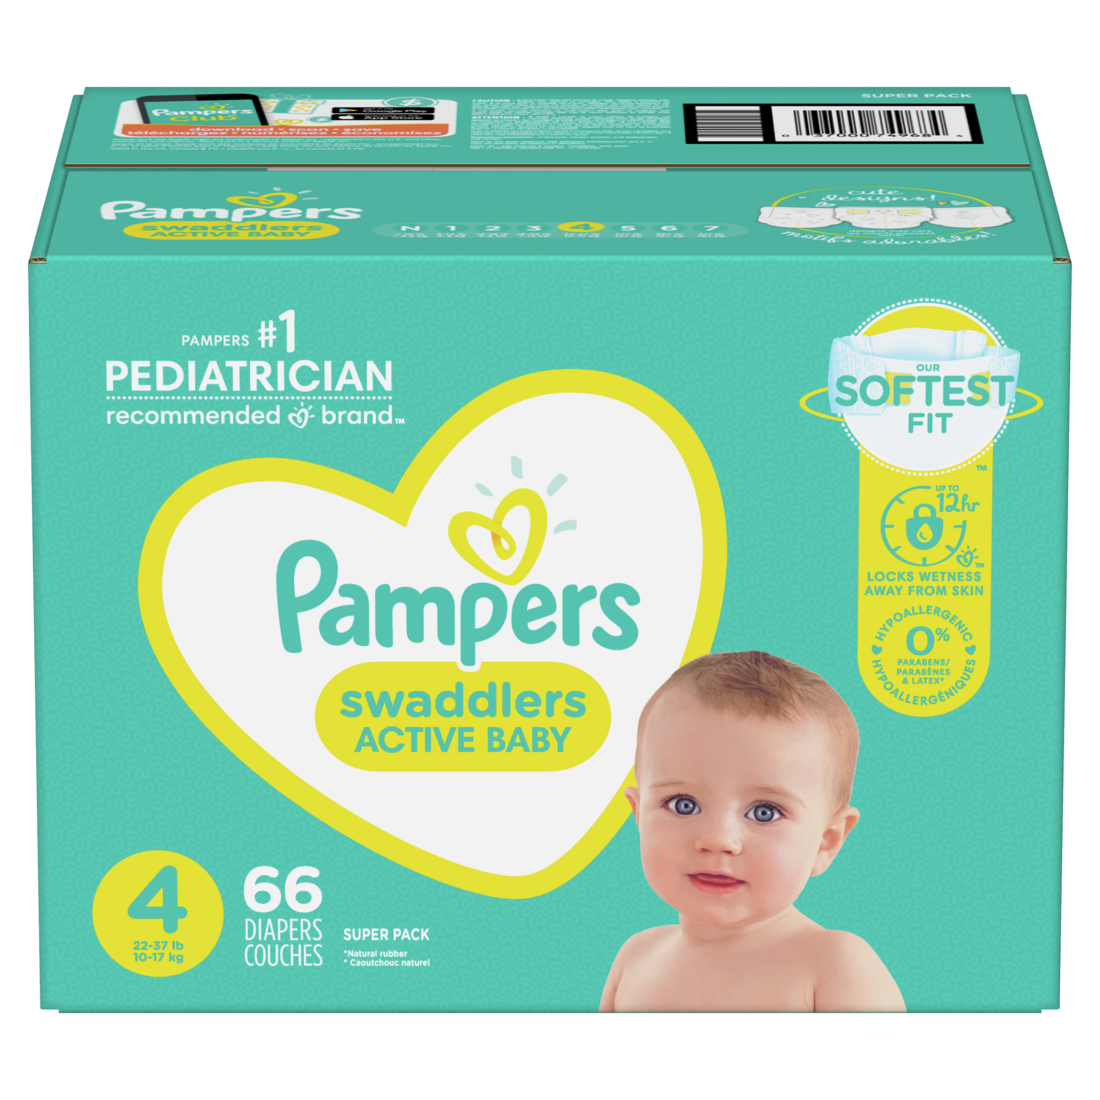 A box of Pampers diapers